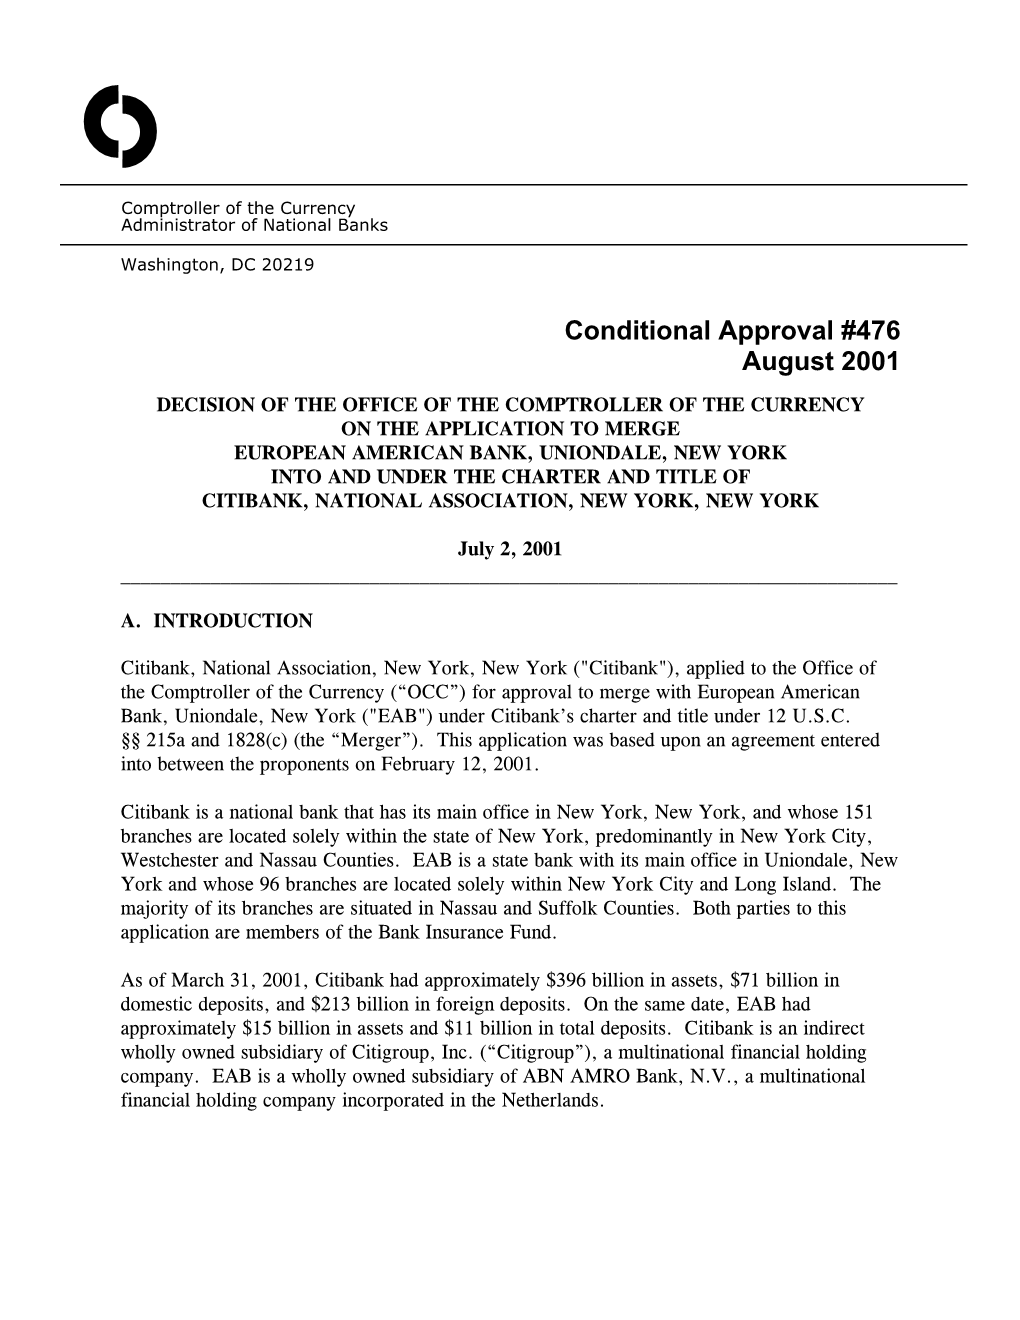 Conditional Approval #476 August 2001